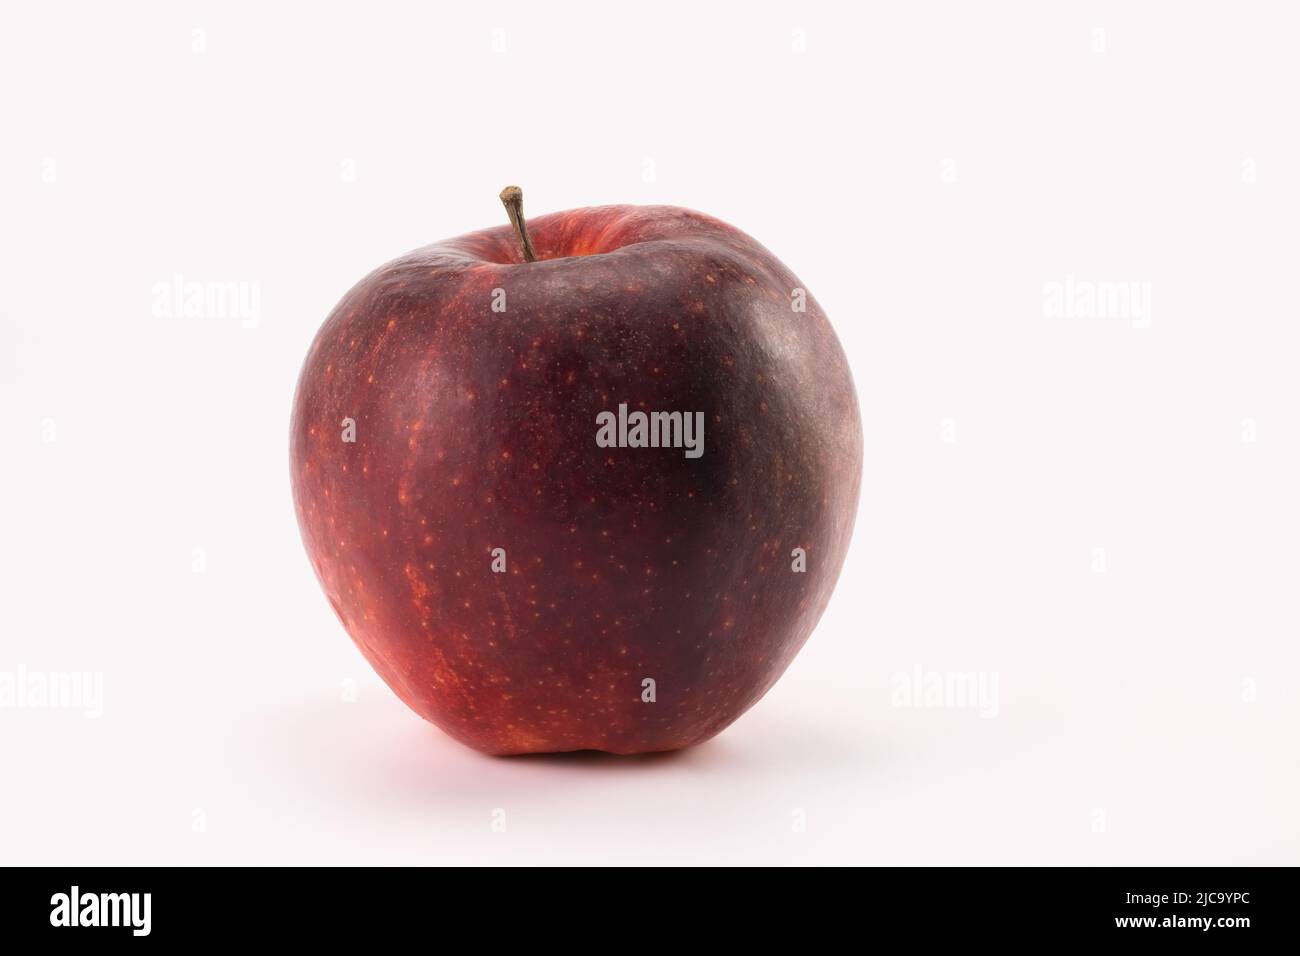 Red apple isolated on bright background. Close up view. Stock Photo